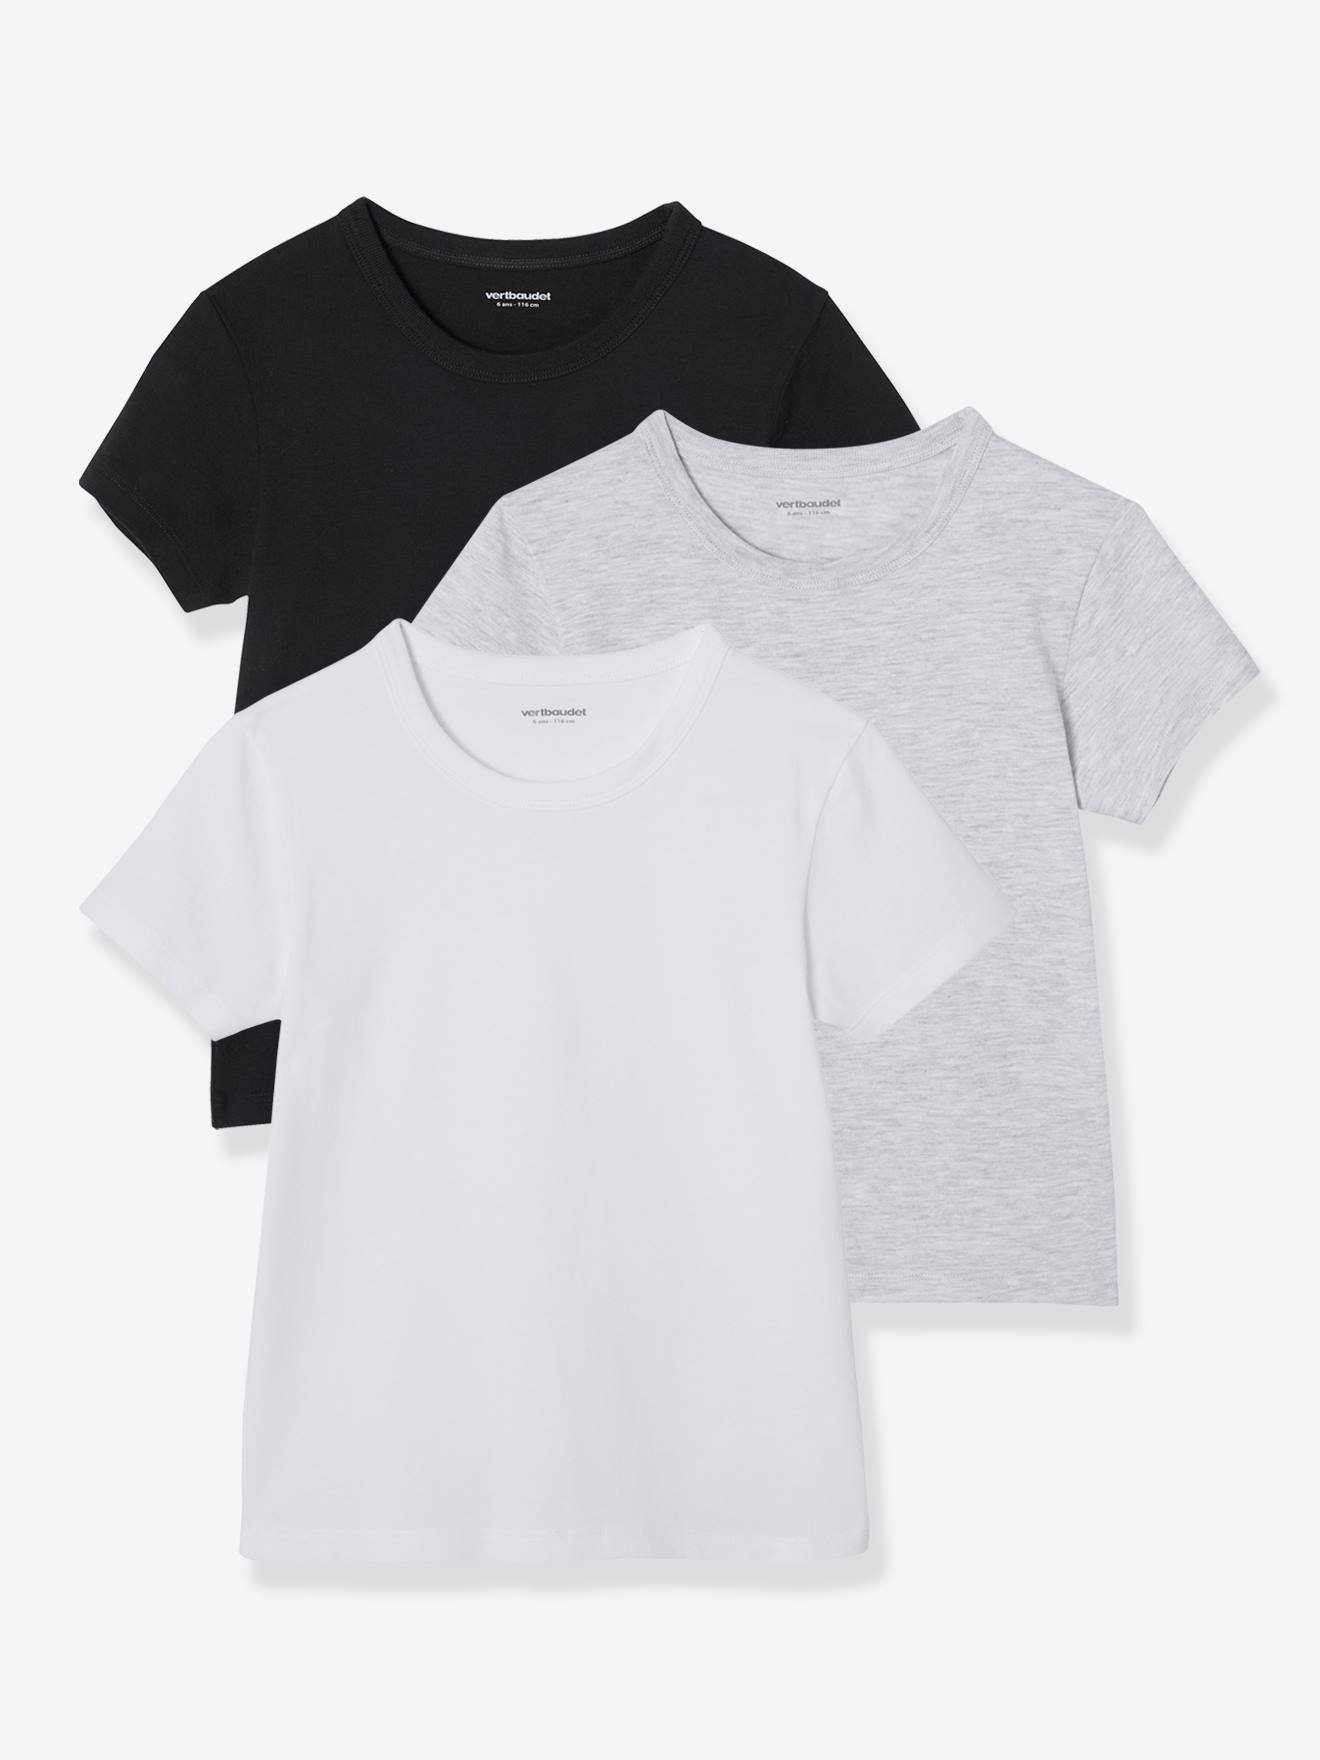 Pack of 3 Short Sleeve T-Shirts for Boys - white